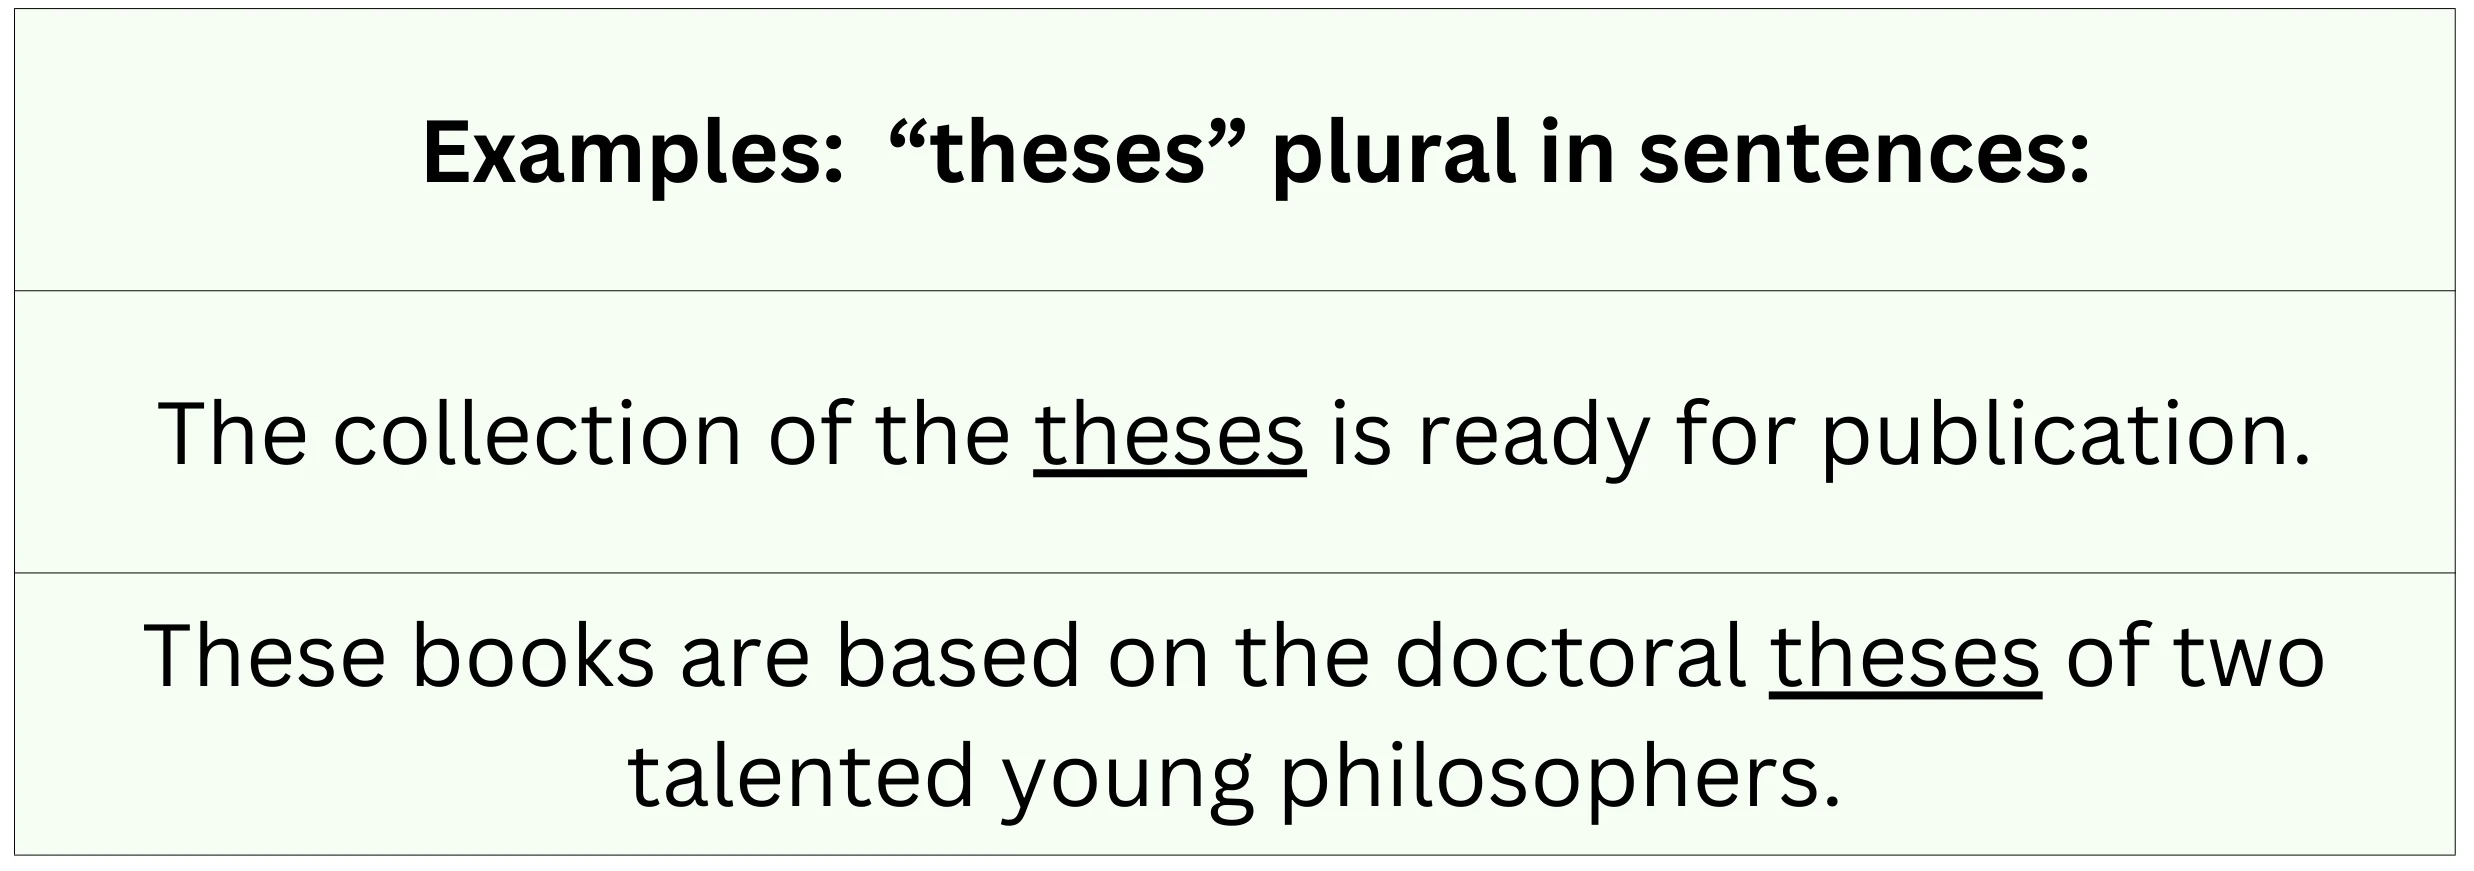 "Theses" plural used in sentence examples.